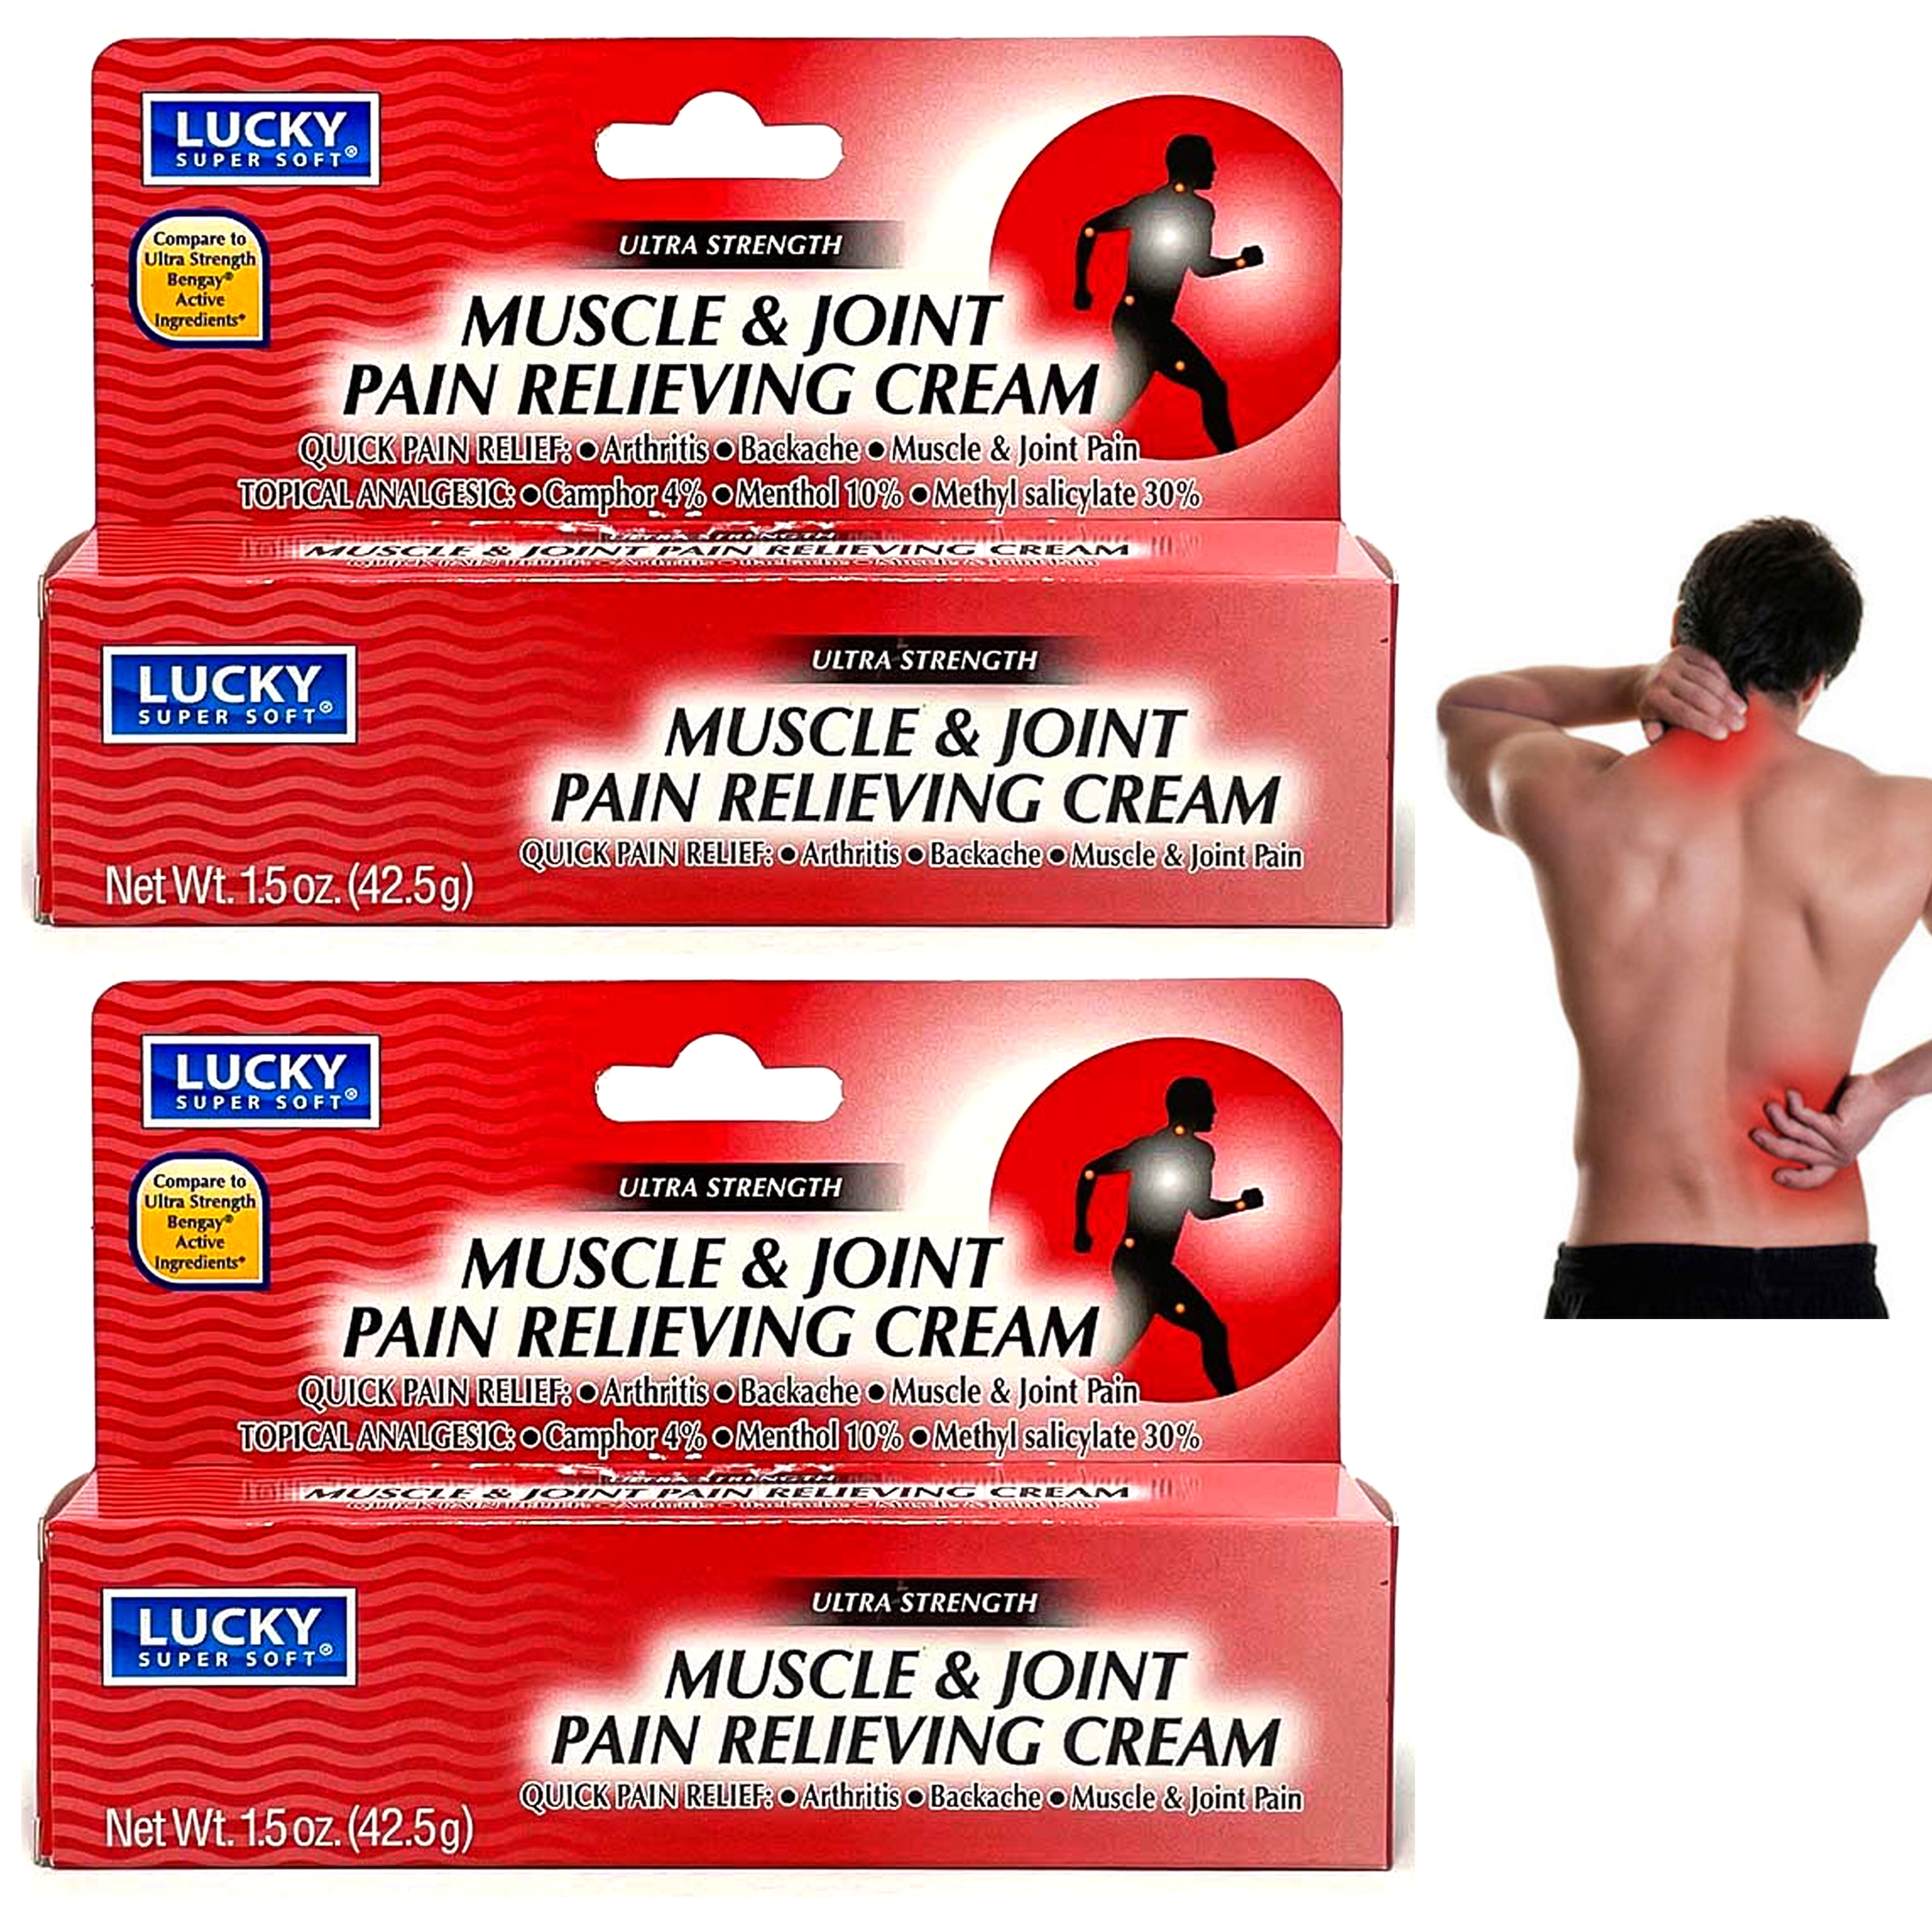 Pain therapy for muscle and joint pain